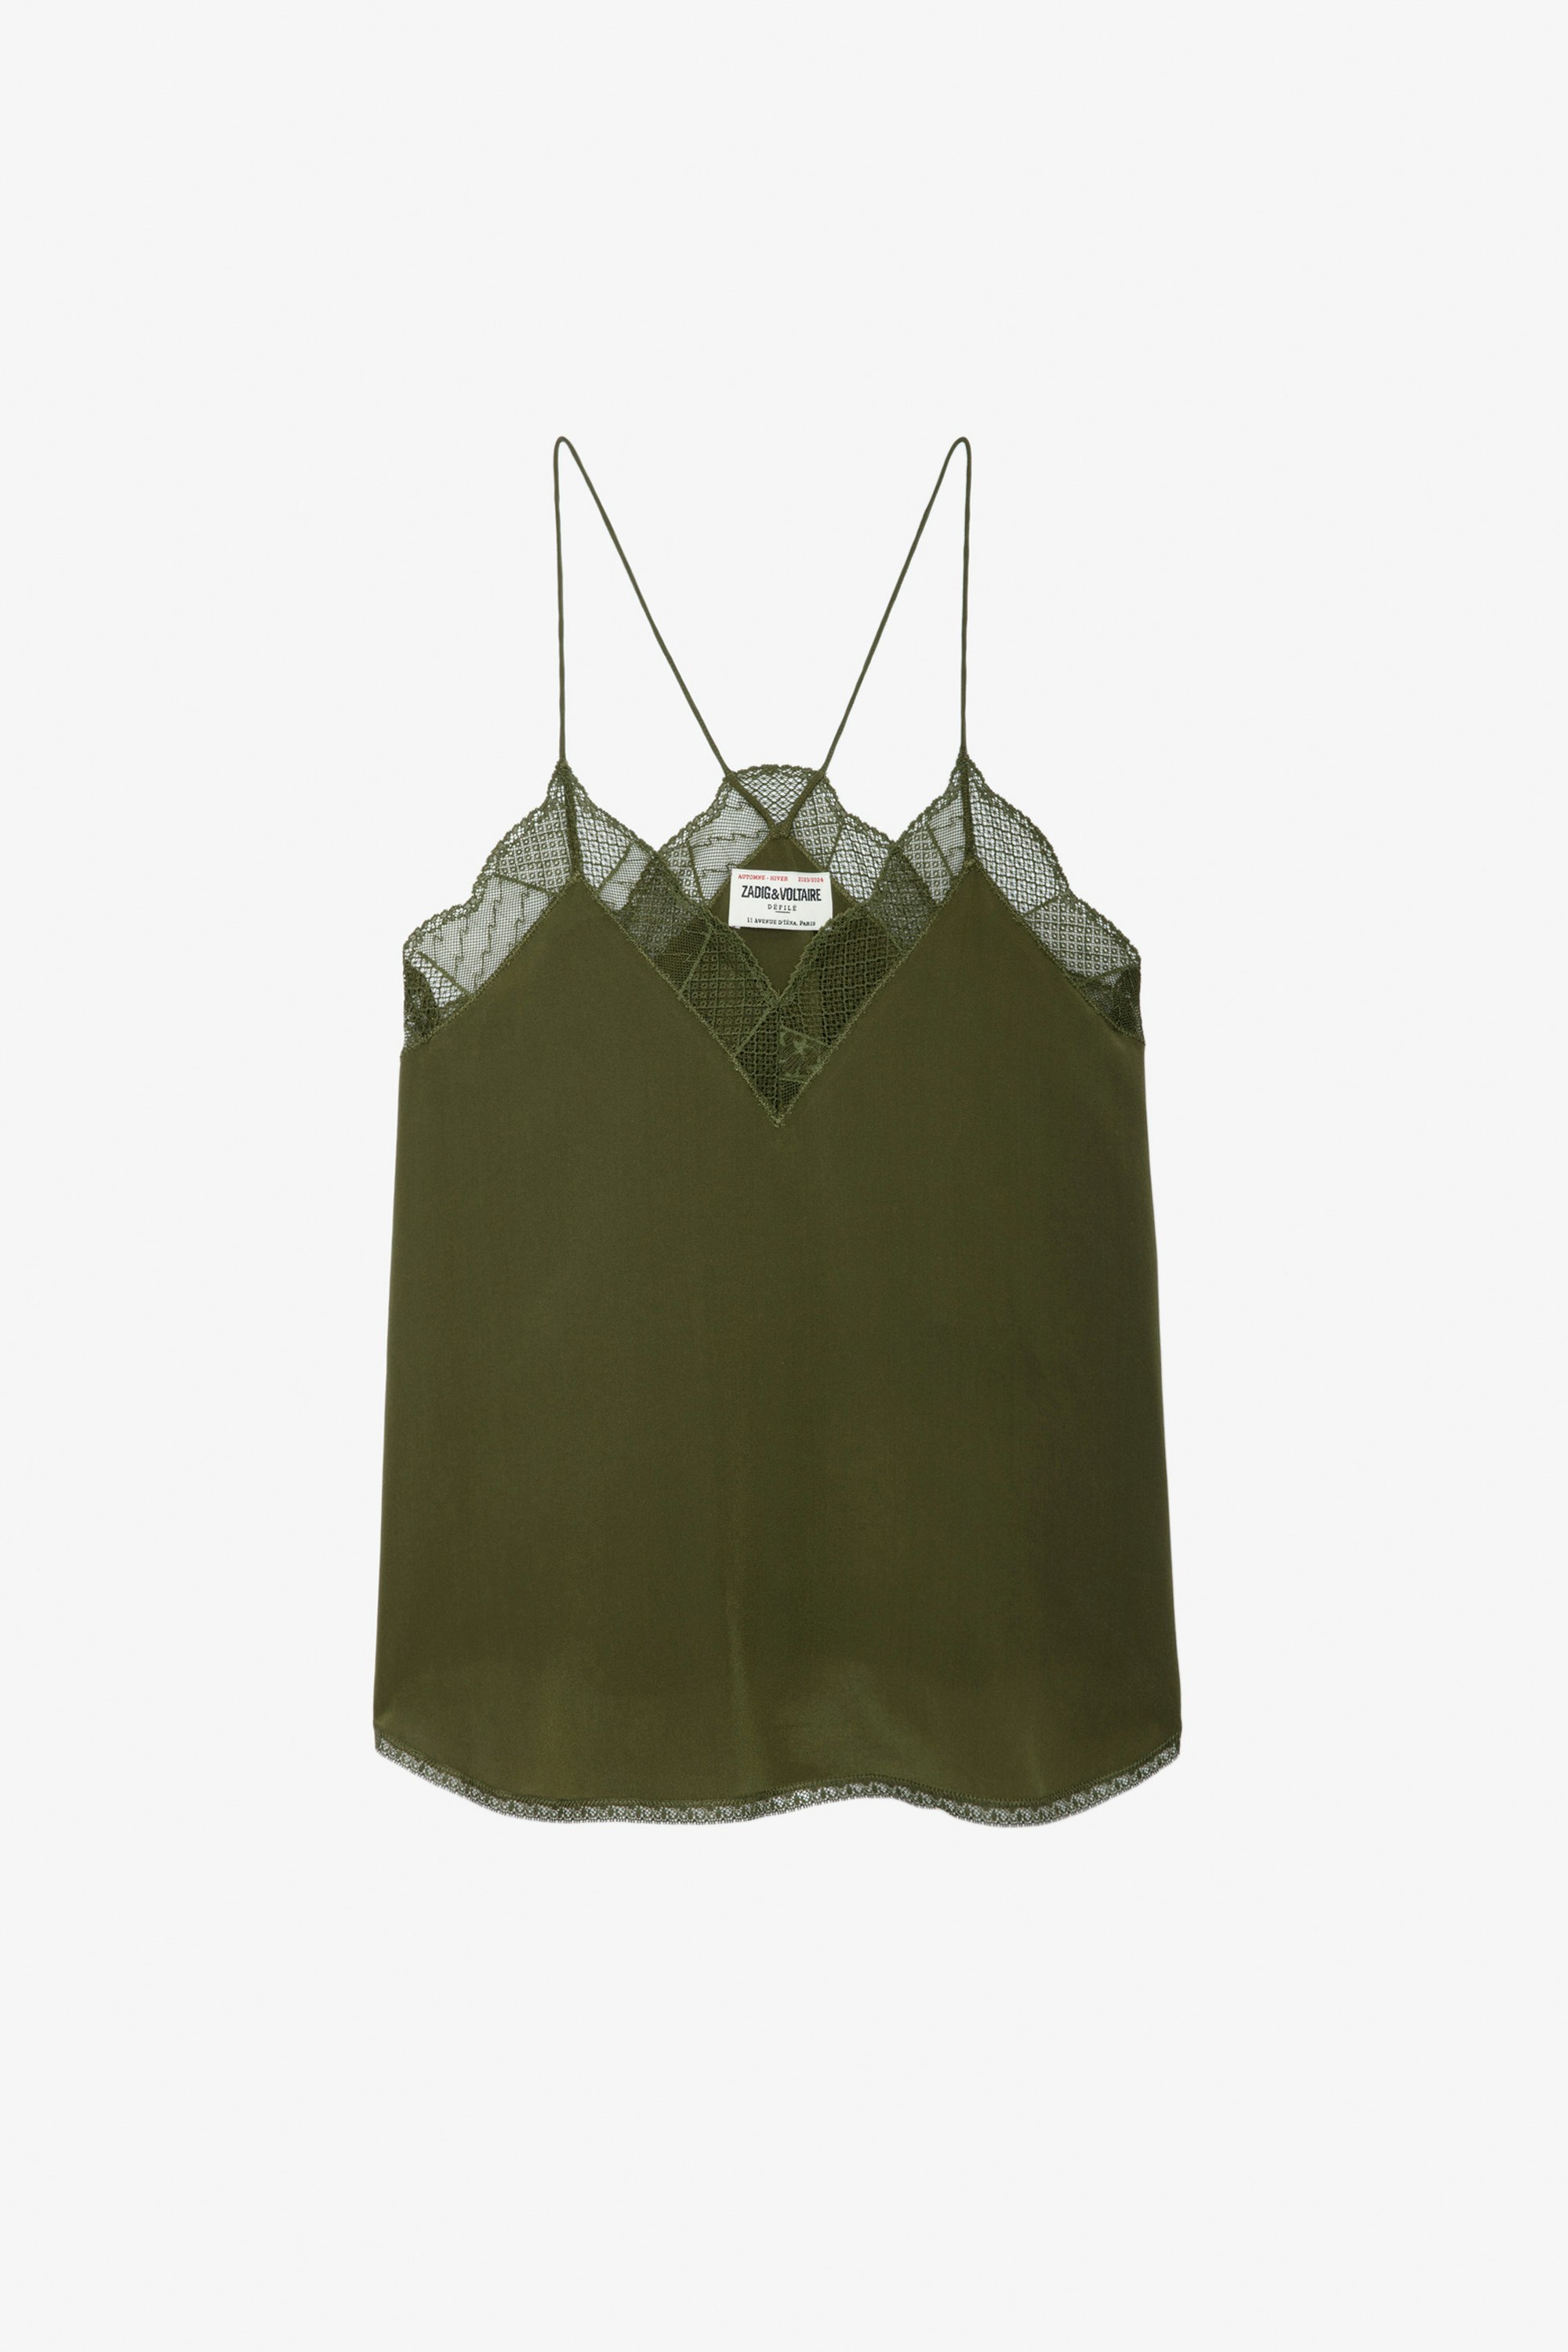 Christy Silk Camisole - Khaki silk lingerie-style camisole with thin straps and lace-trimmed neckline.